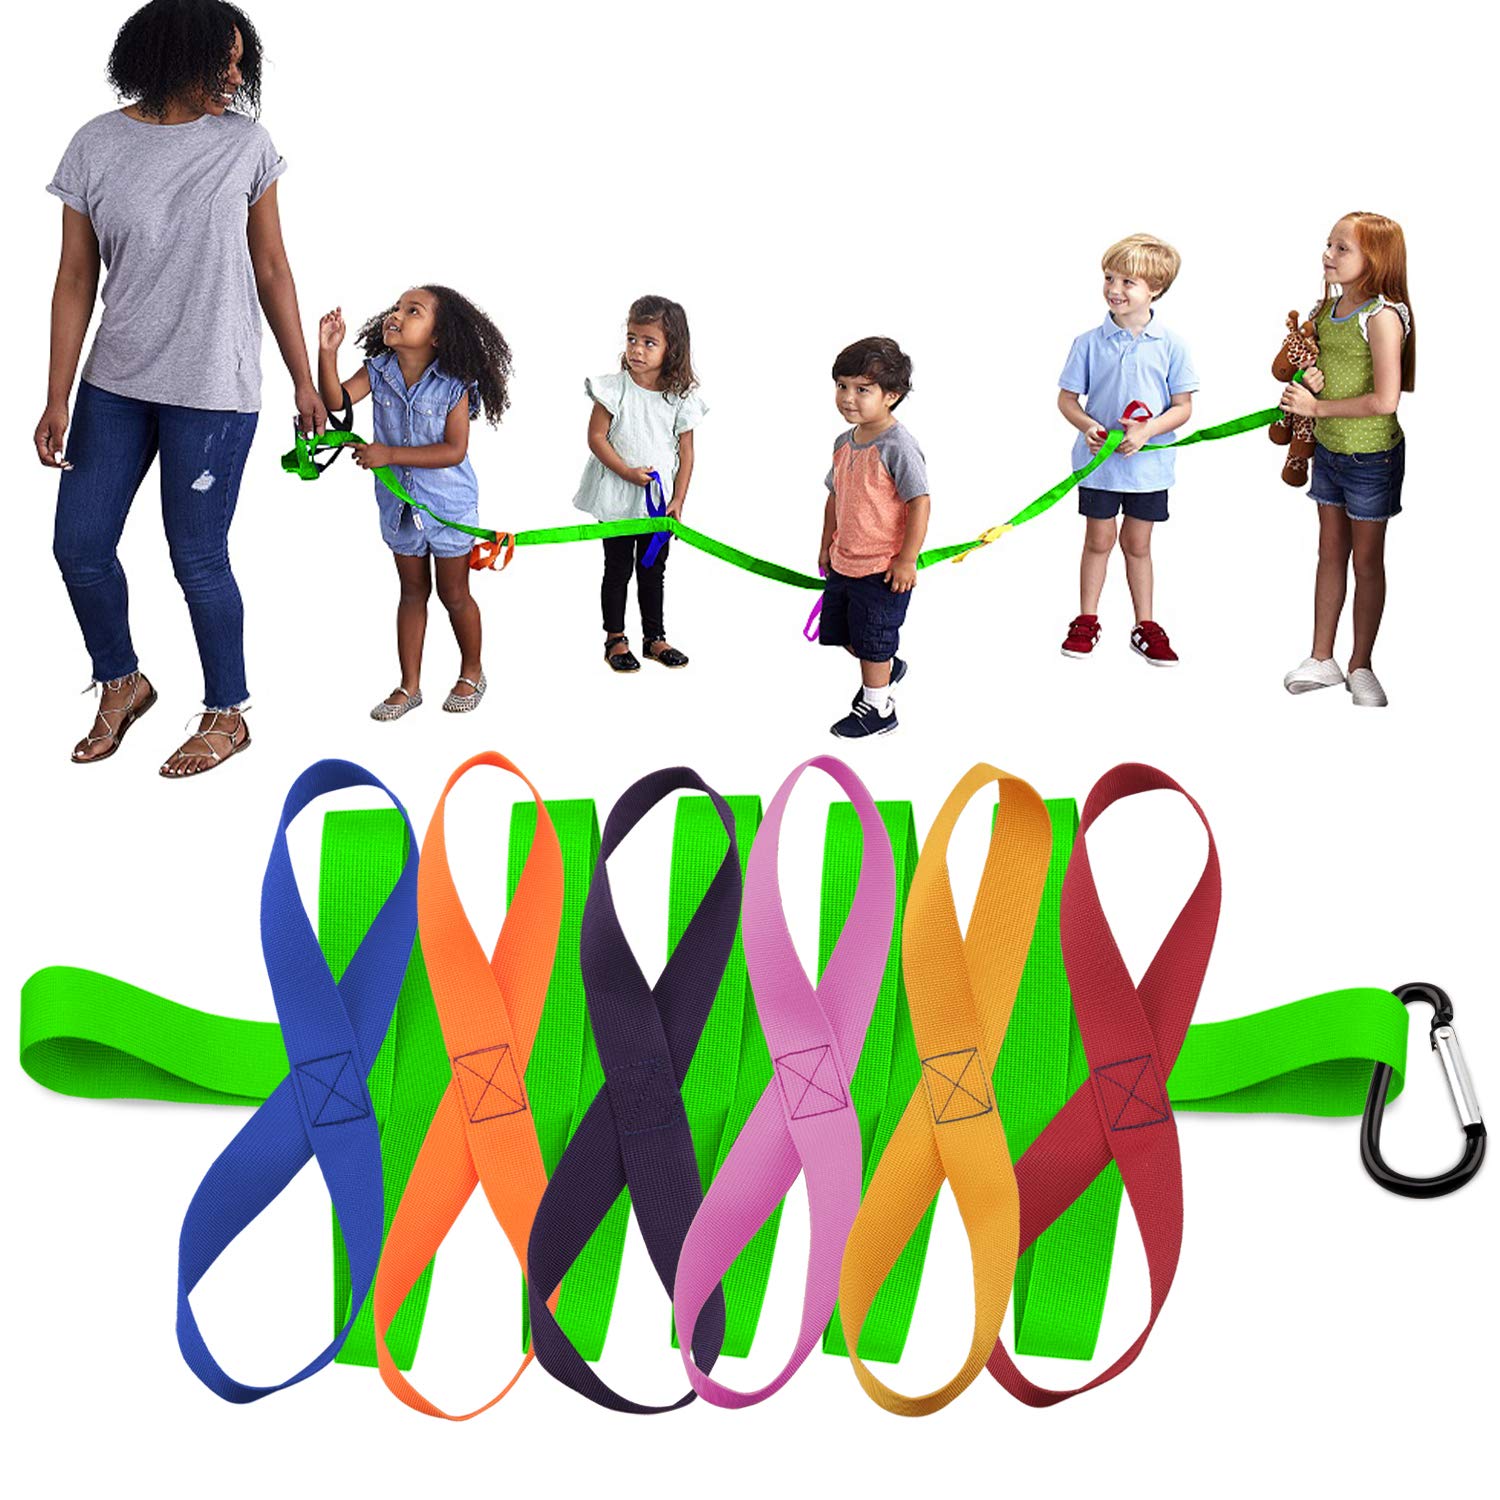 Lainrrew Walking Rope, children Safety Walking Rope with 12 colorful Handles Outdoor Safety Daycare Rope for Preschool Daycare K